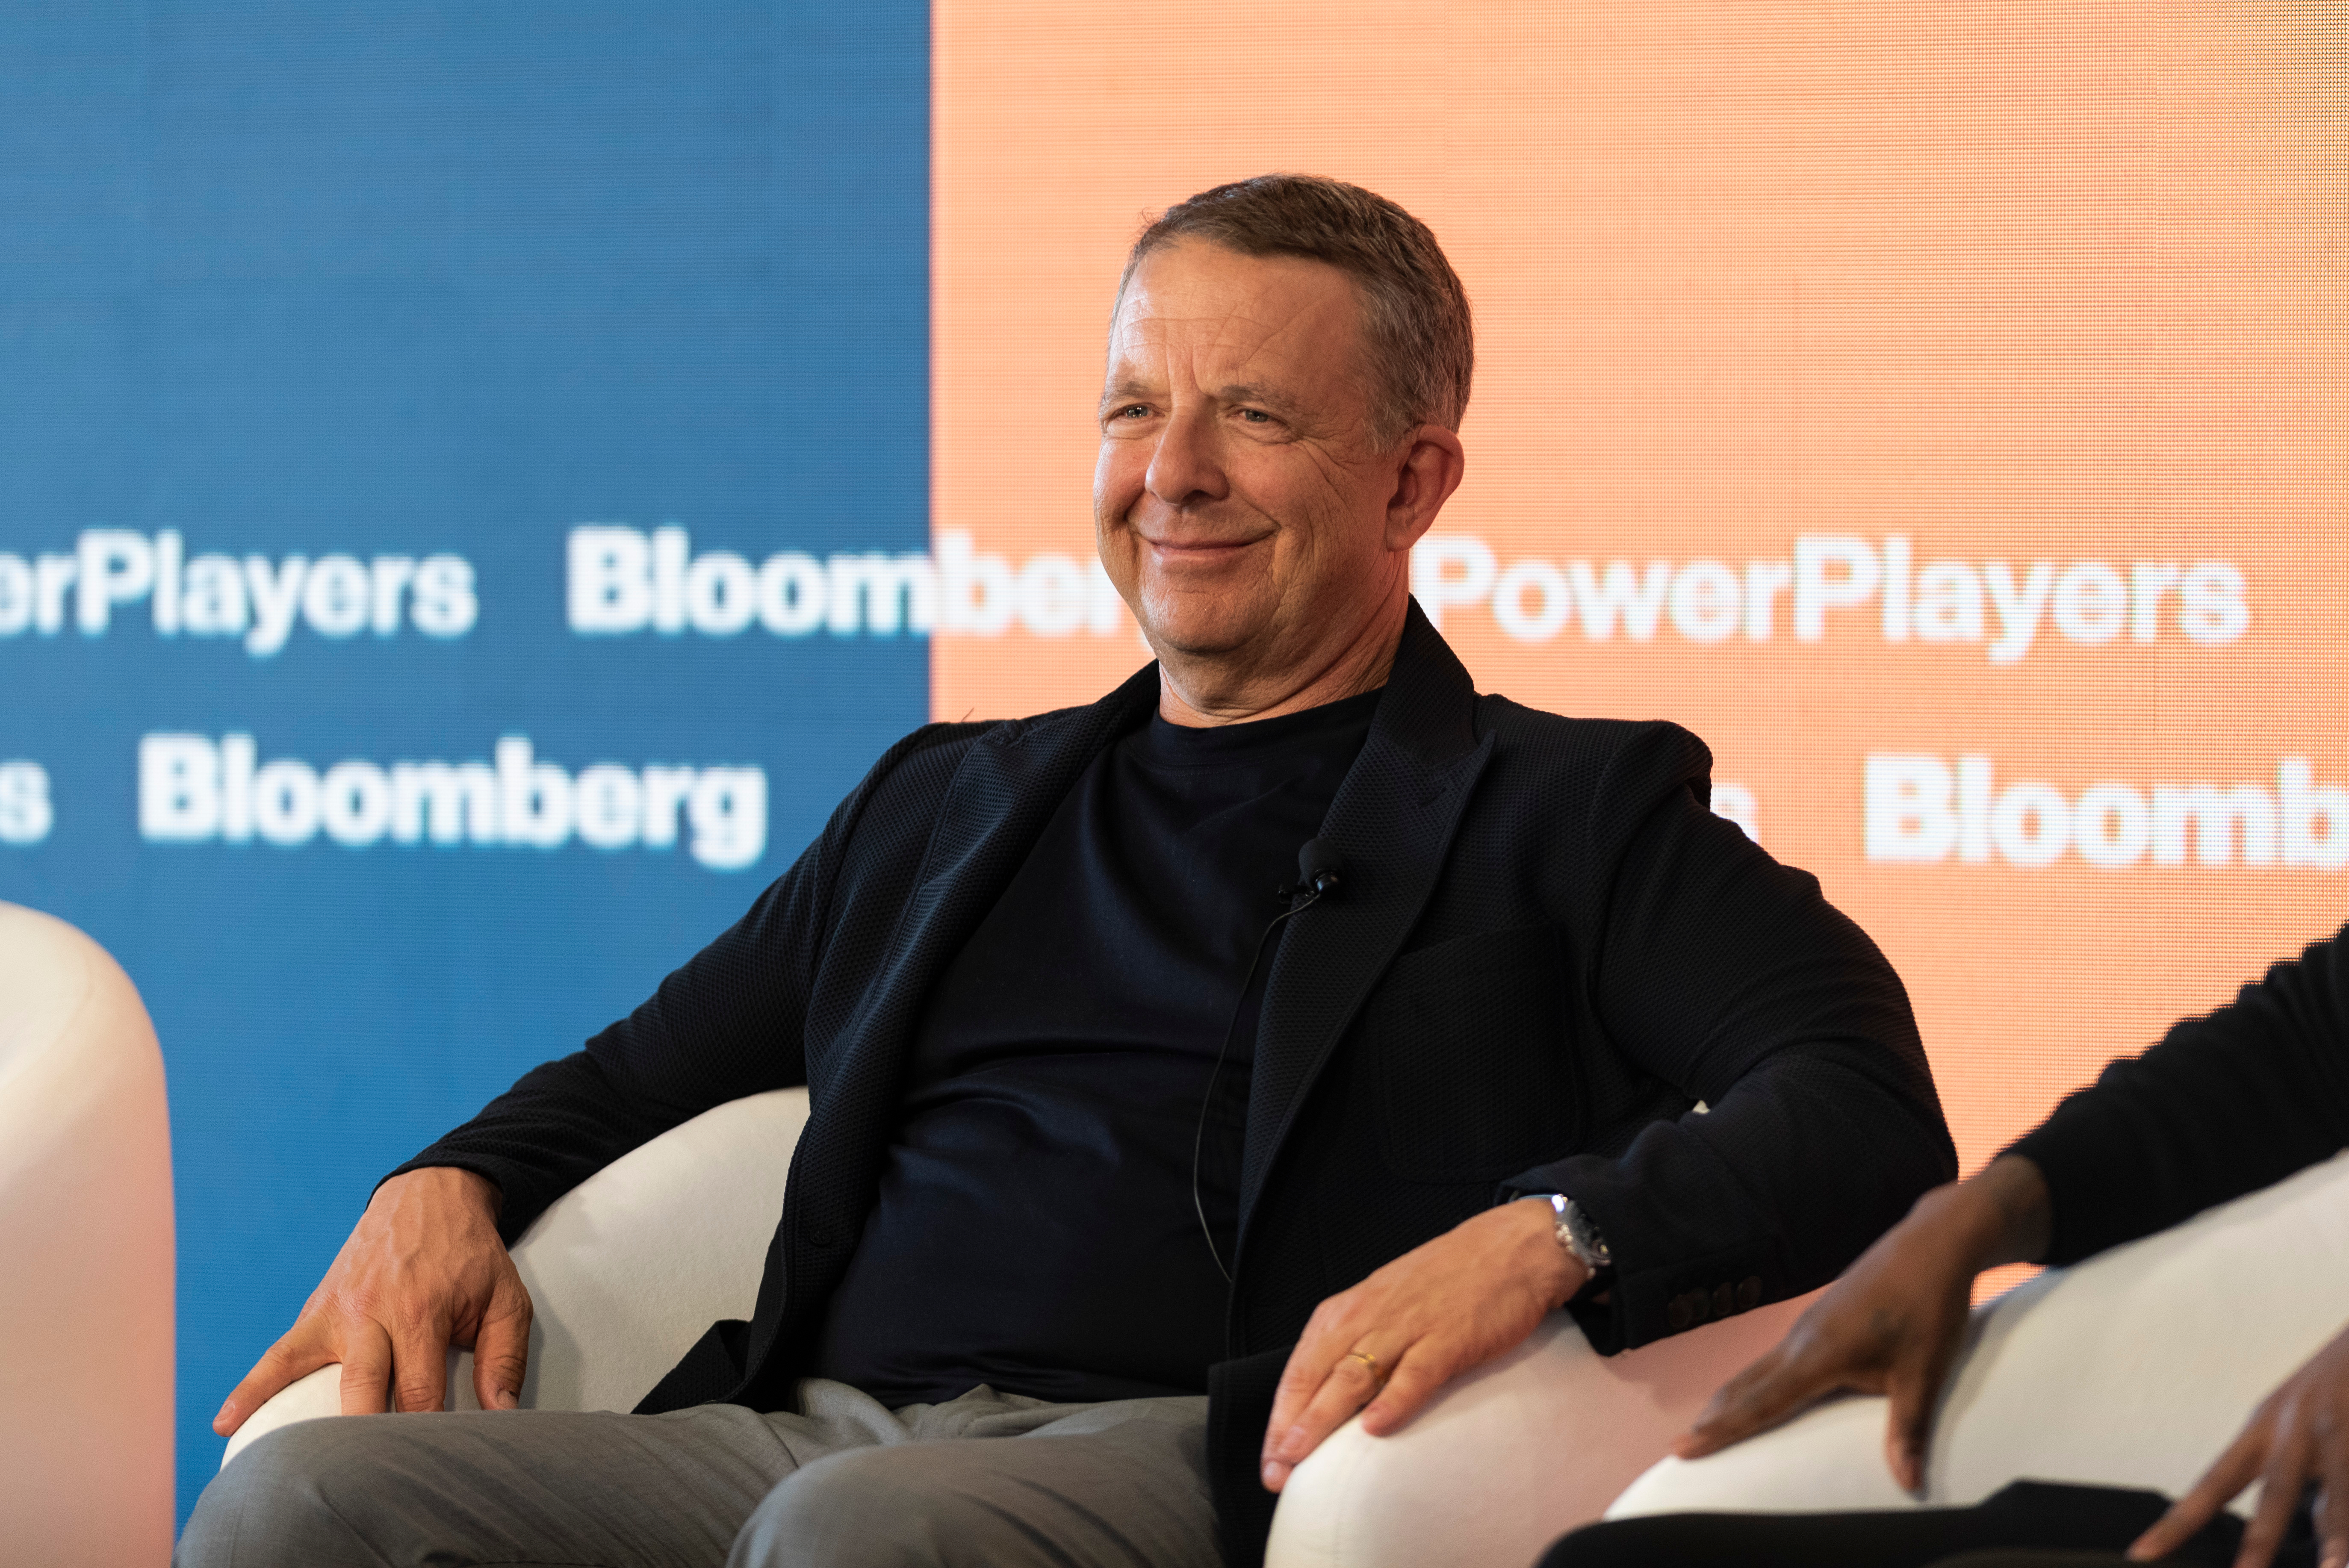 Key Speakers At The Bloomberg Power Players Conference